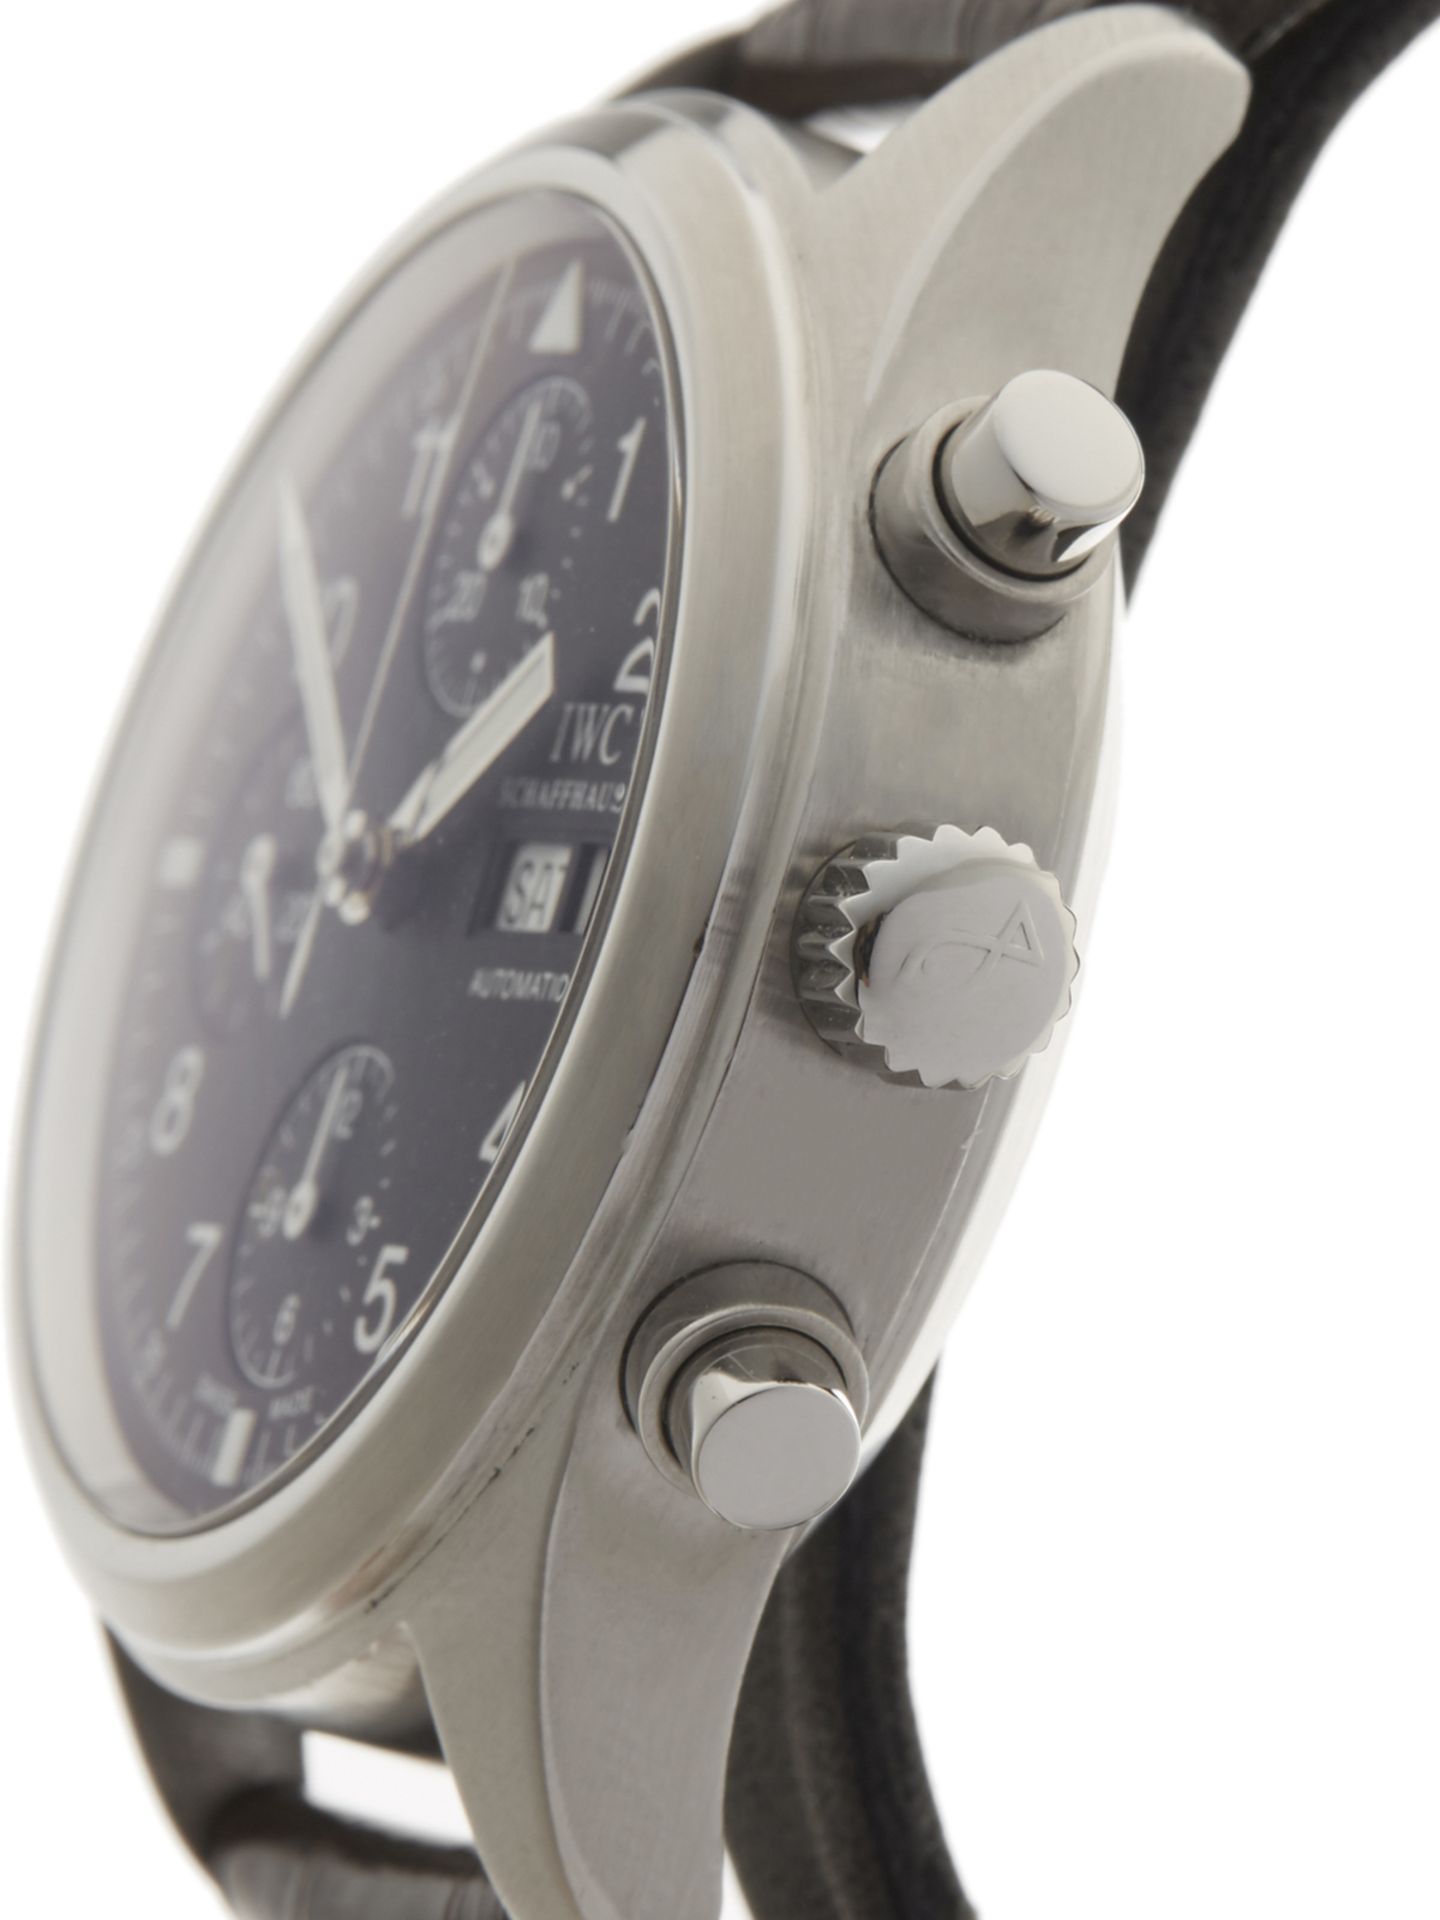 IWC Pilot's Chronograph Fliegerchronograph 39mm Stainless Steel IW3706 - Image 4 of 8